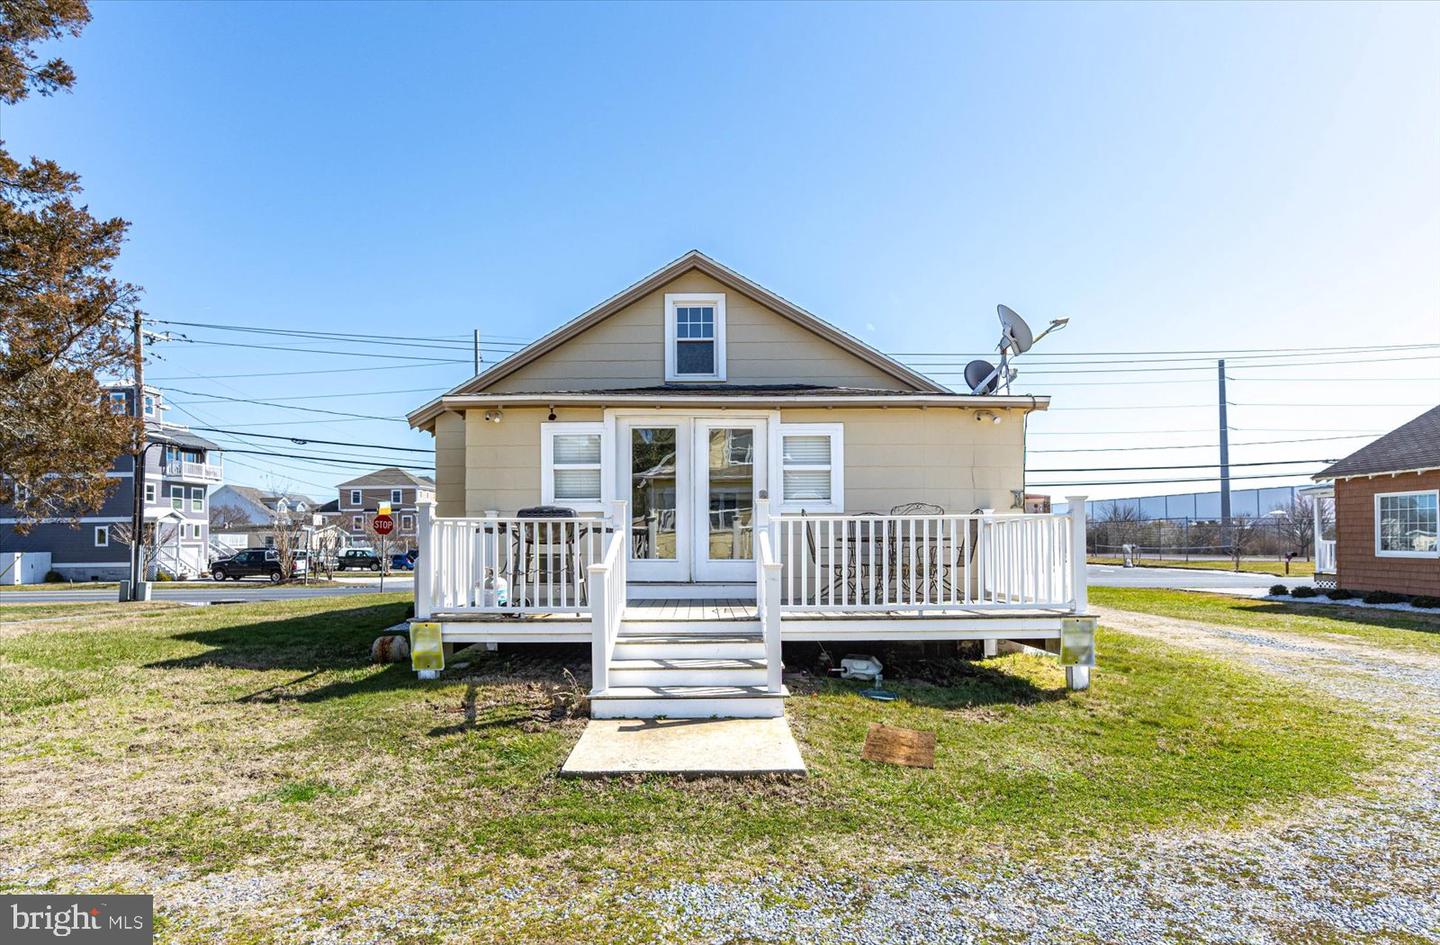 MDWO2019110-802902593690-2024-03-05-14-03-41 9801/9805 Golf Course Rd | Ocean City, MD Real Estate For Sale | MLS# Mdwo2019110  - 1st Choice Properties